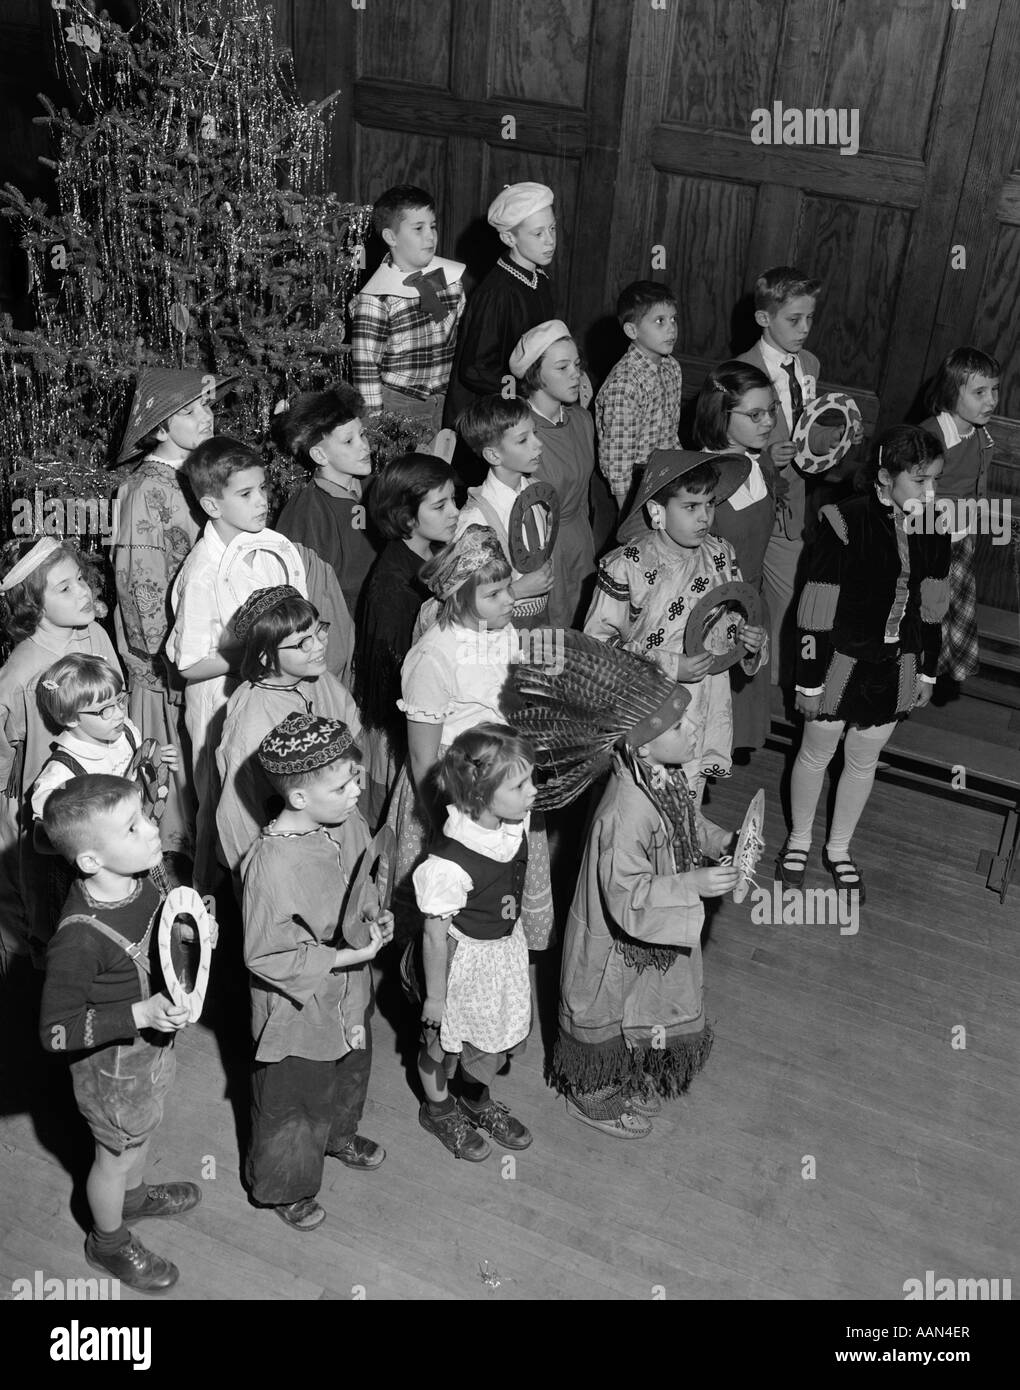 1950s SCHOOL CHILDREN IN CHRISTMAS PAGEANT COSTUMES MULTICULTURAL DIVERSE BOYS GIRLS CLASS PLAY ELEMENTARY SCHOOL Stock Photo